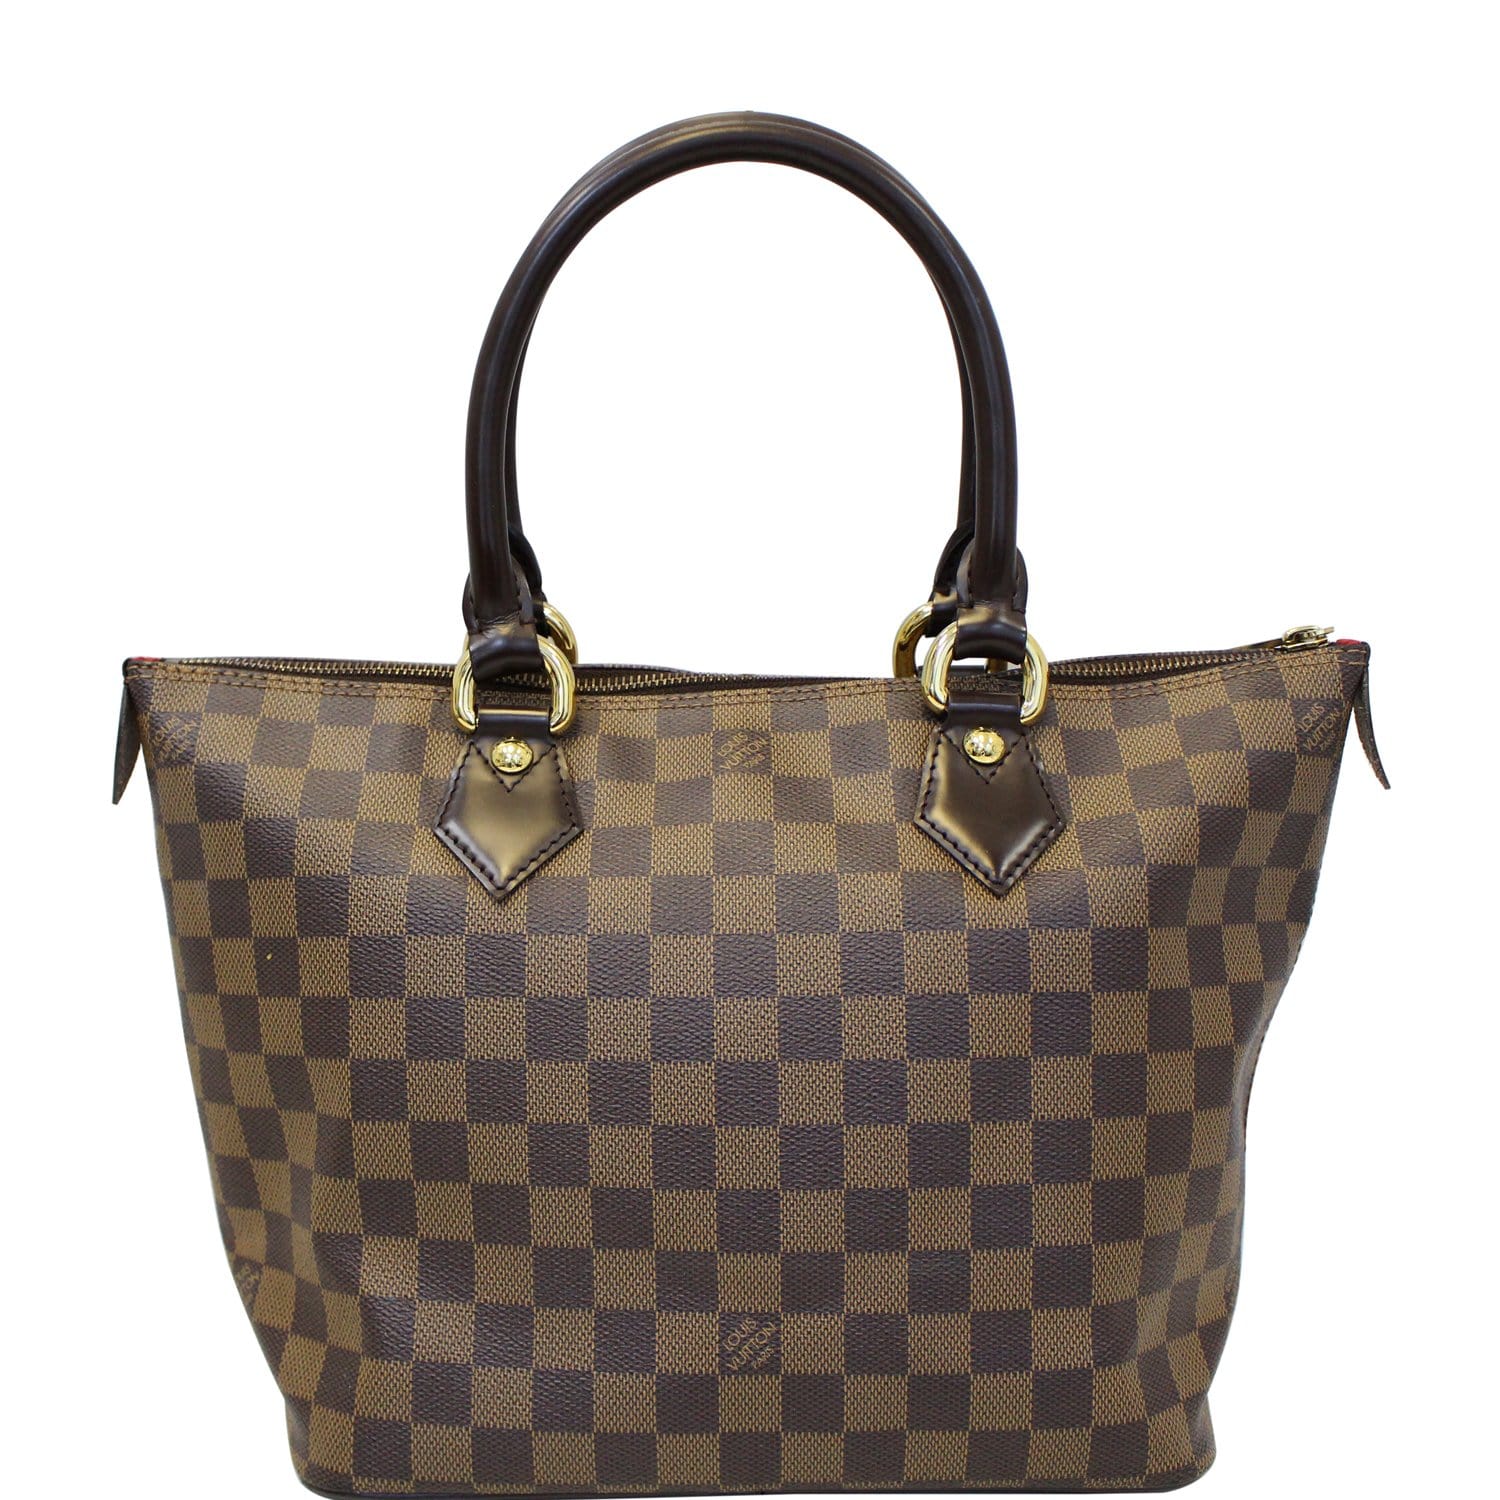 LV Saleya PM Tote in Damier Azur Canvas and GHW